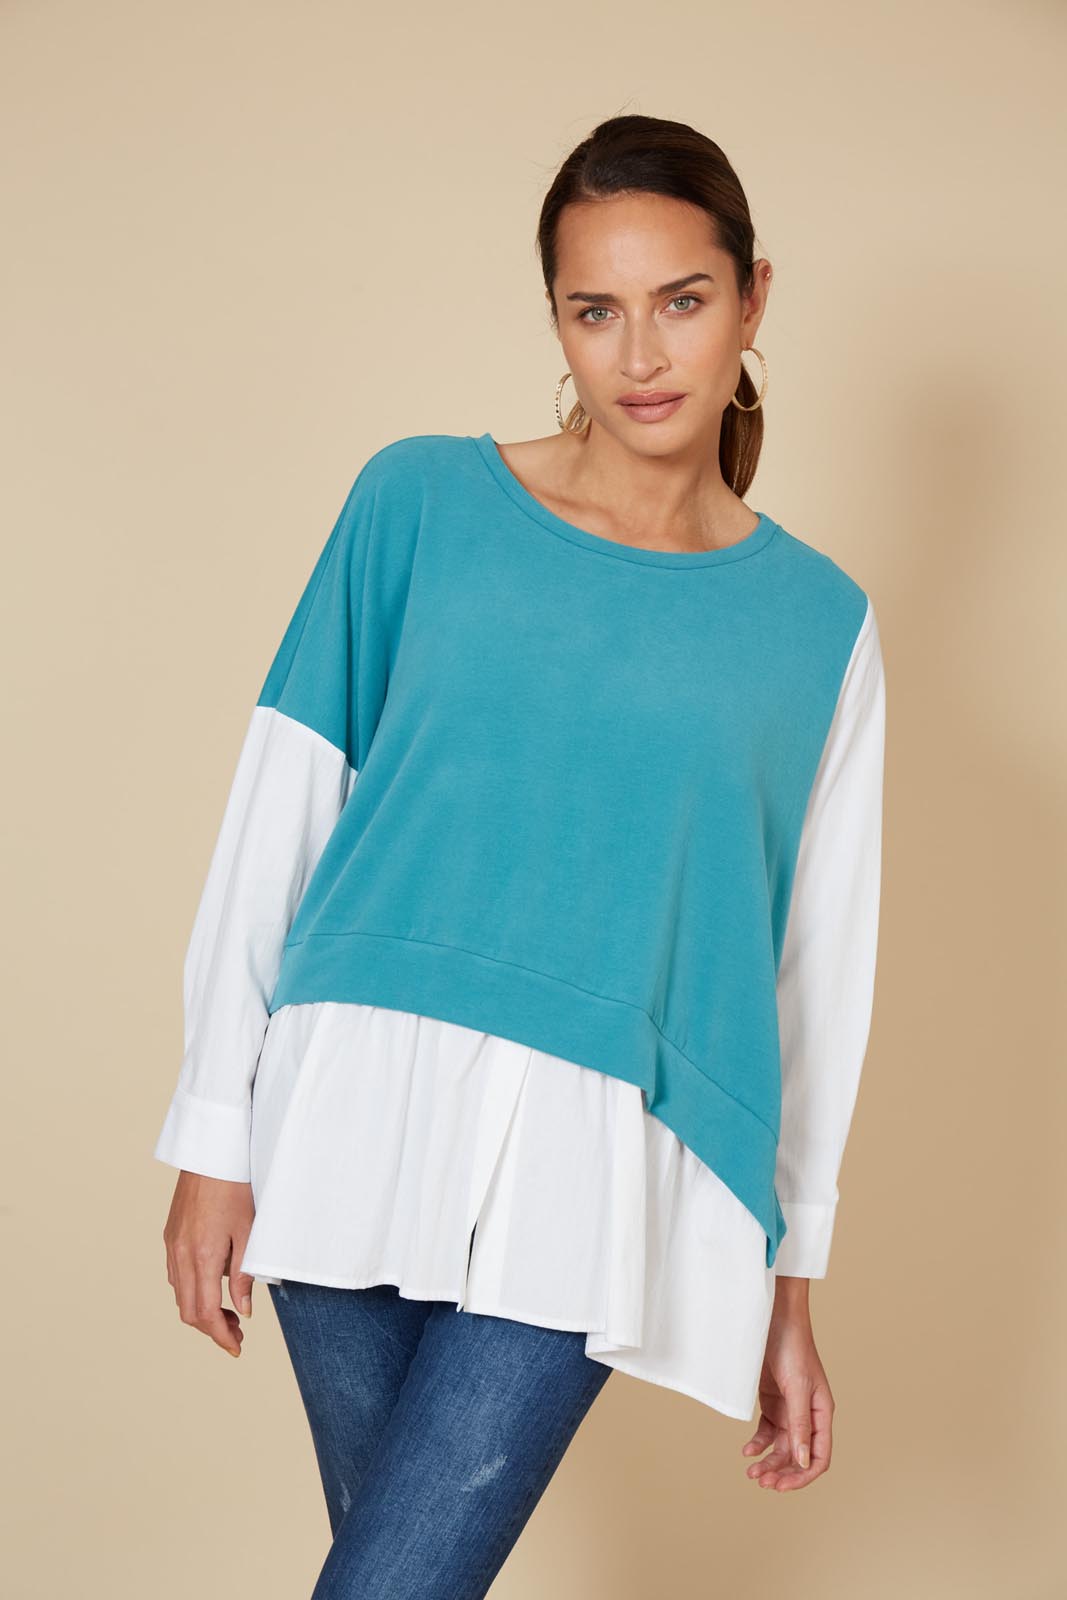 Martini Shirt Top - Teal - eb&ive Clothing - Top Tshirt L/S Relaxed